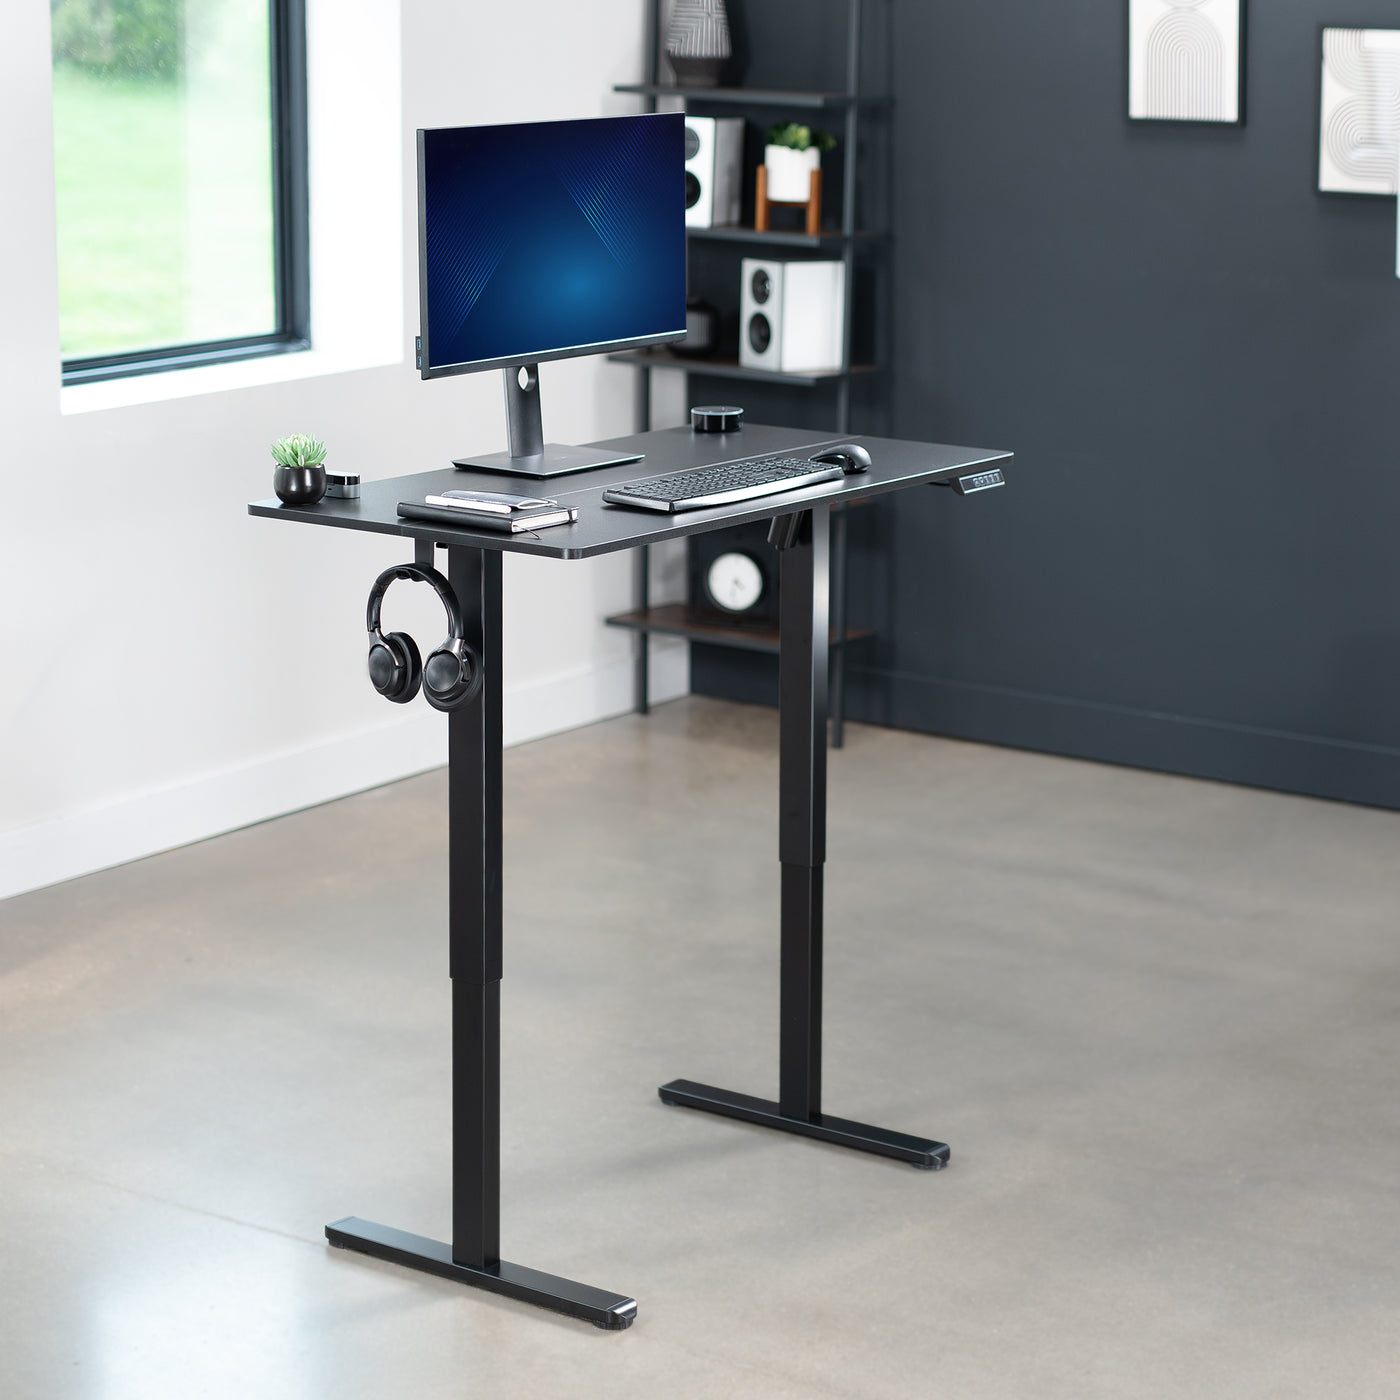 Electric 44" x 24" Sit Stand Desk Workstation